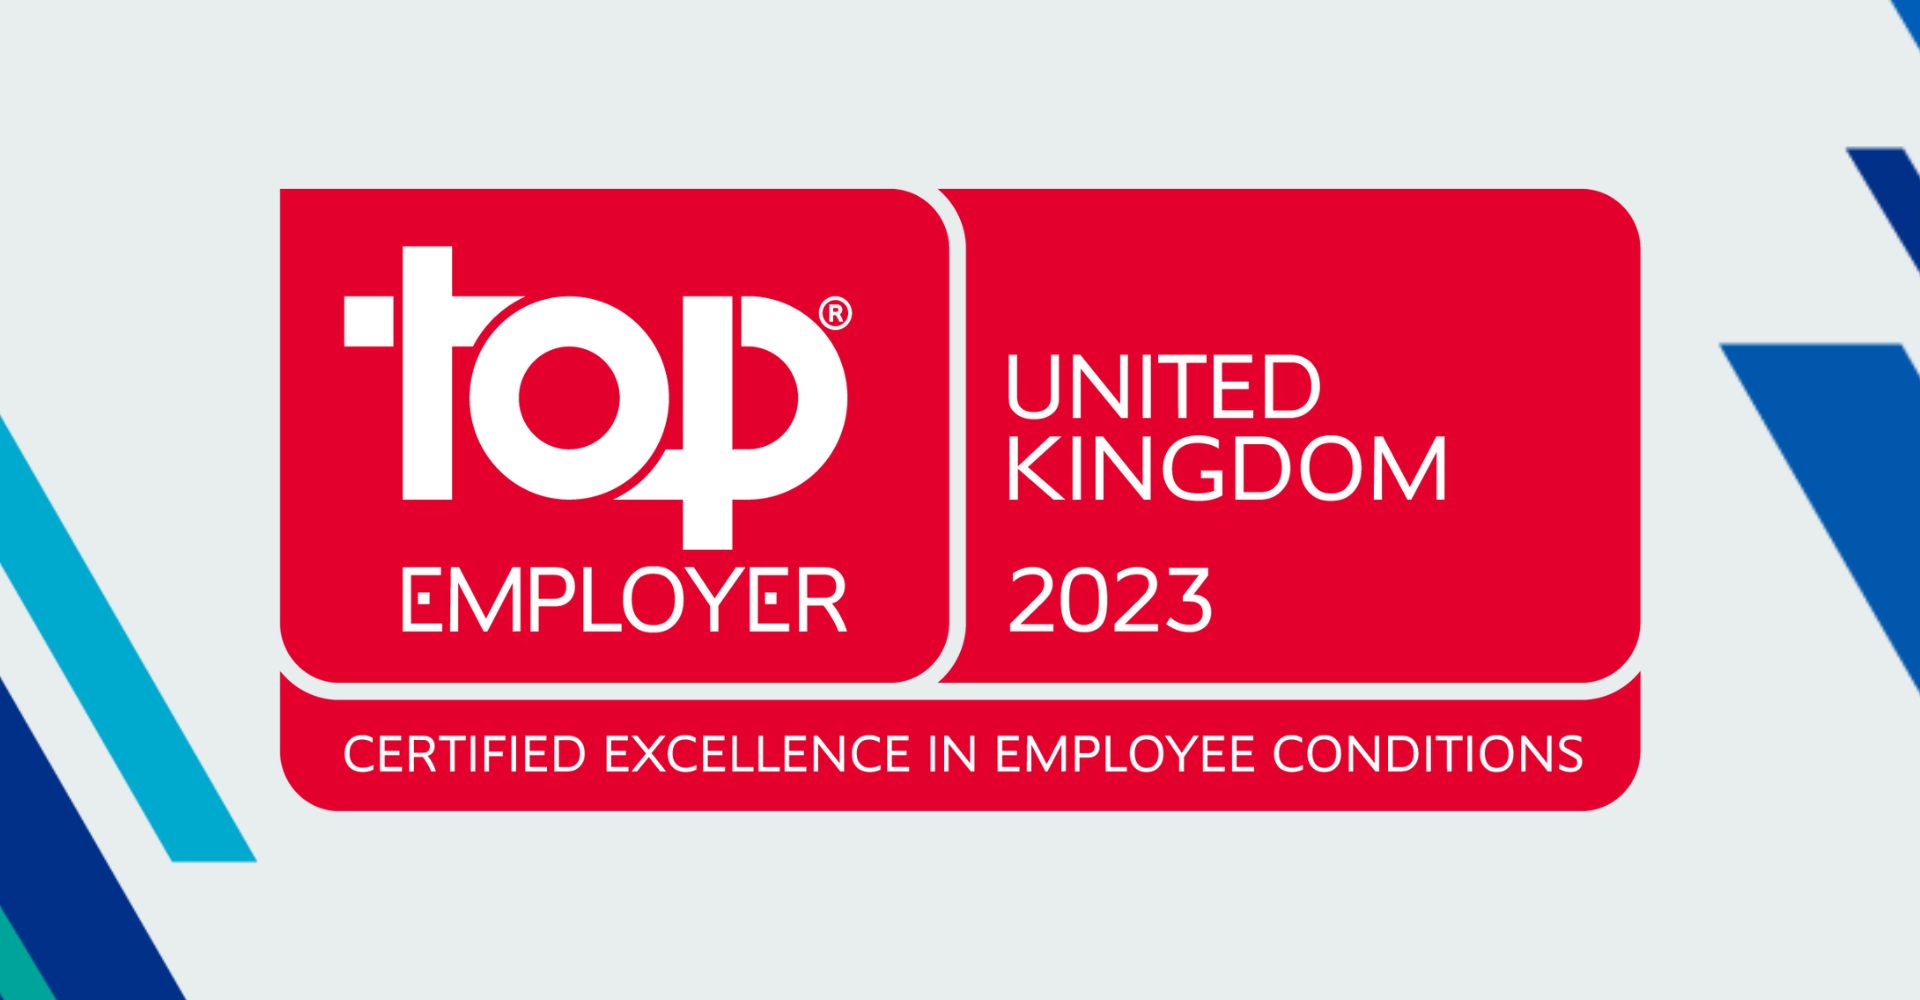 NHS Professionals is recognised as a Top Employer 